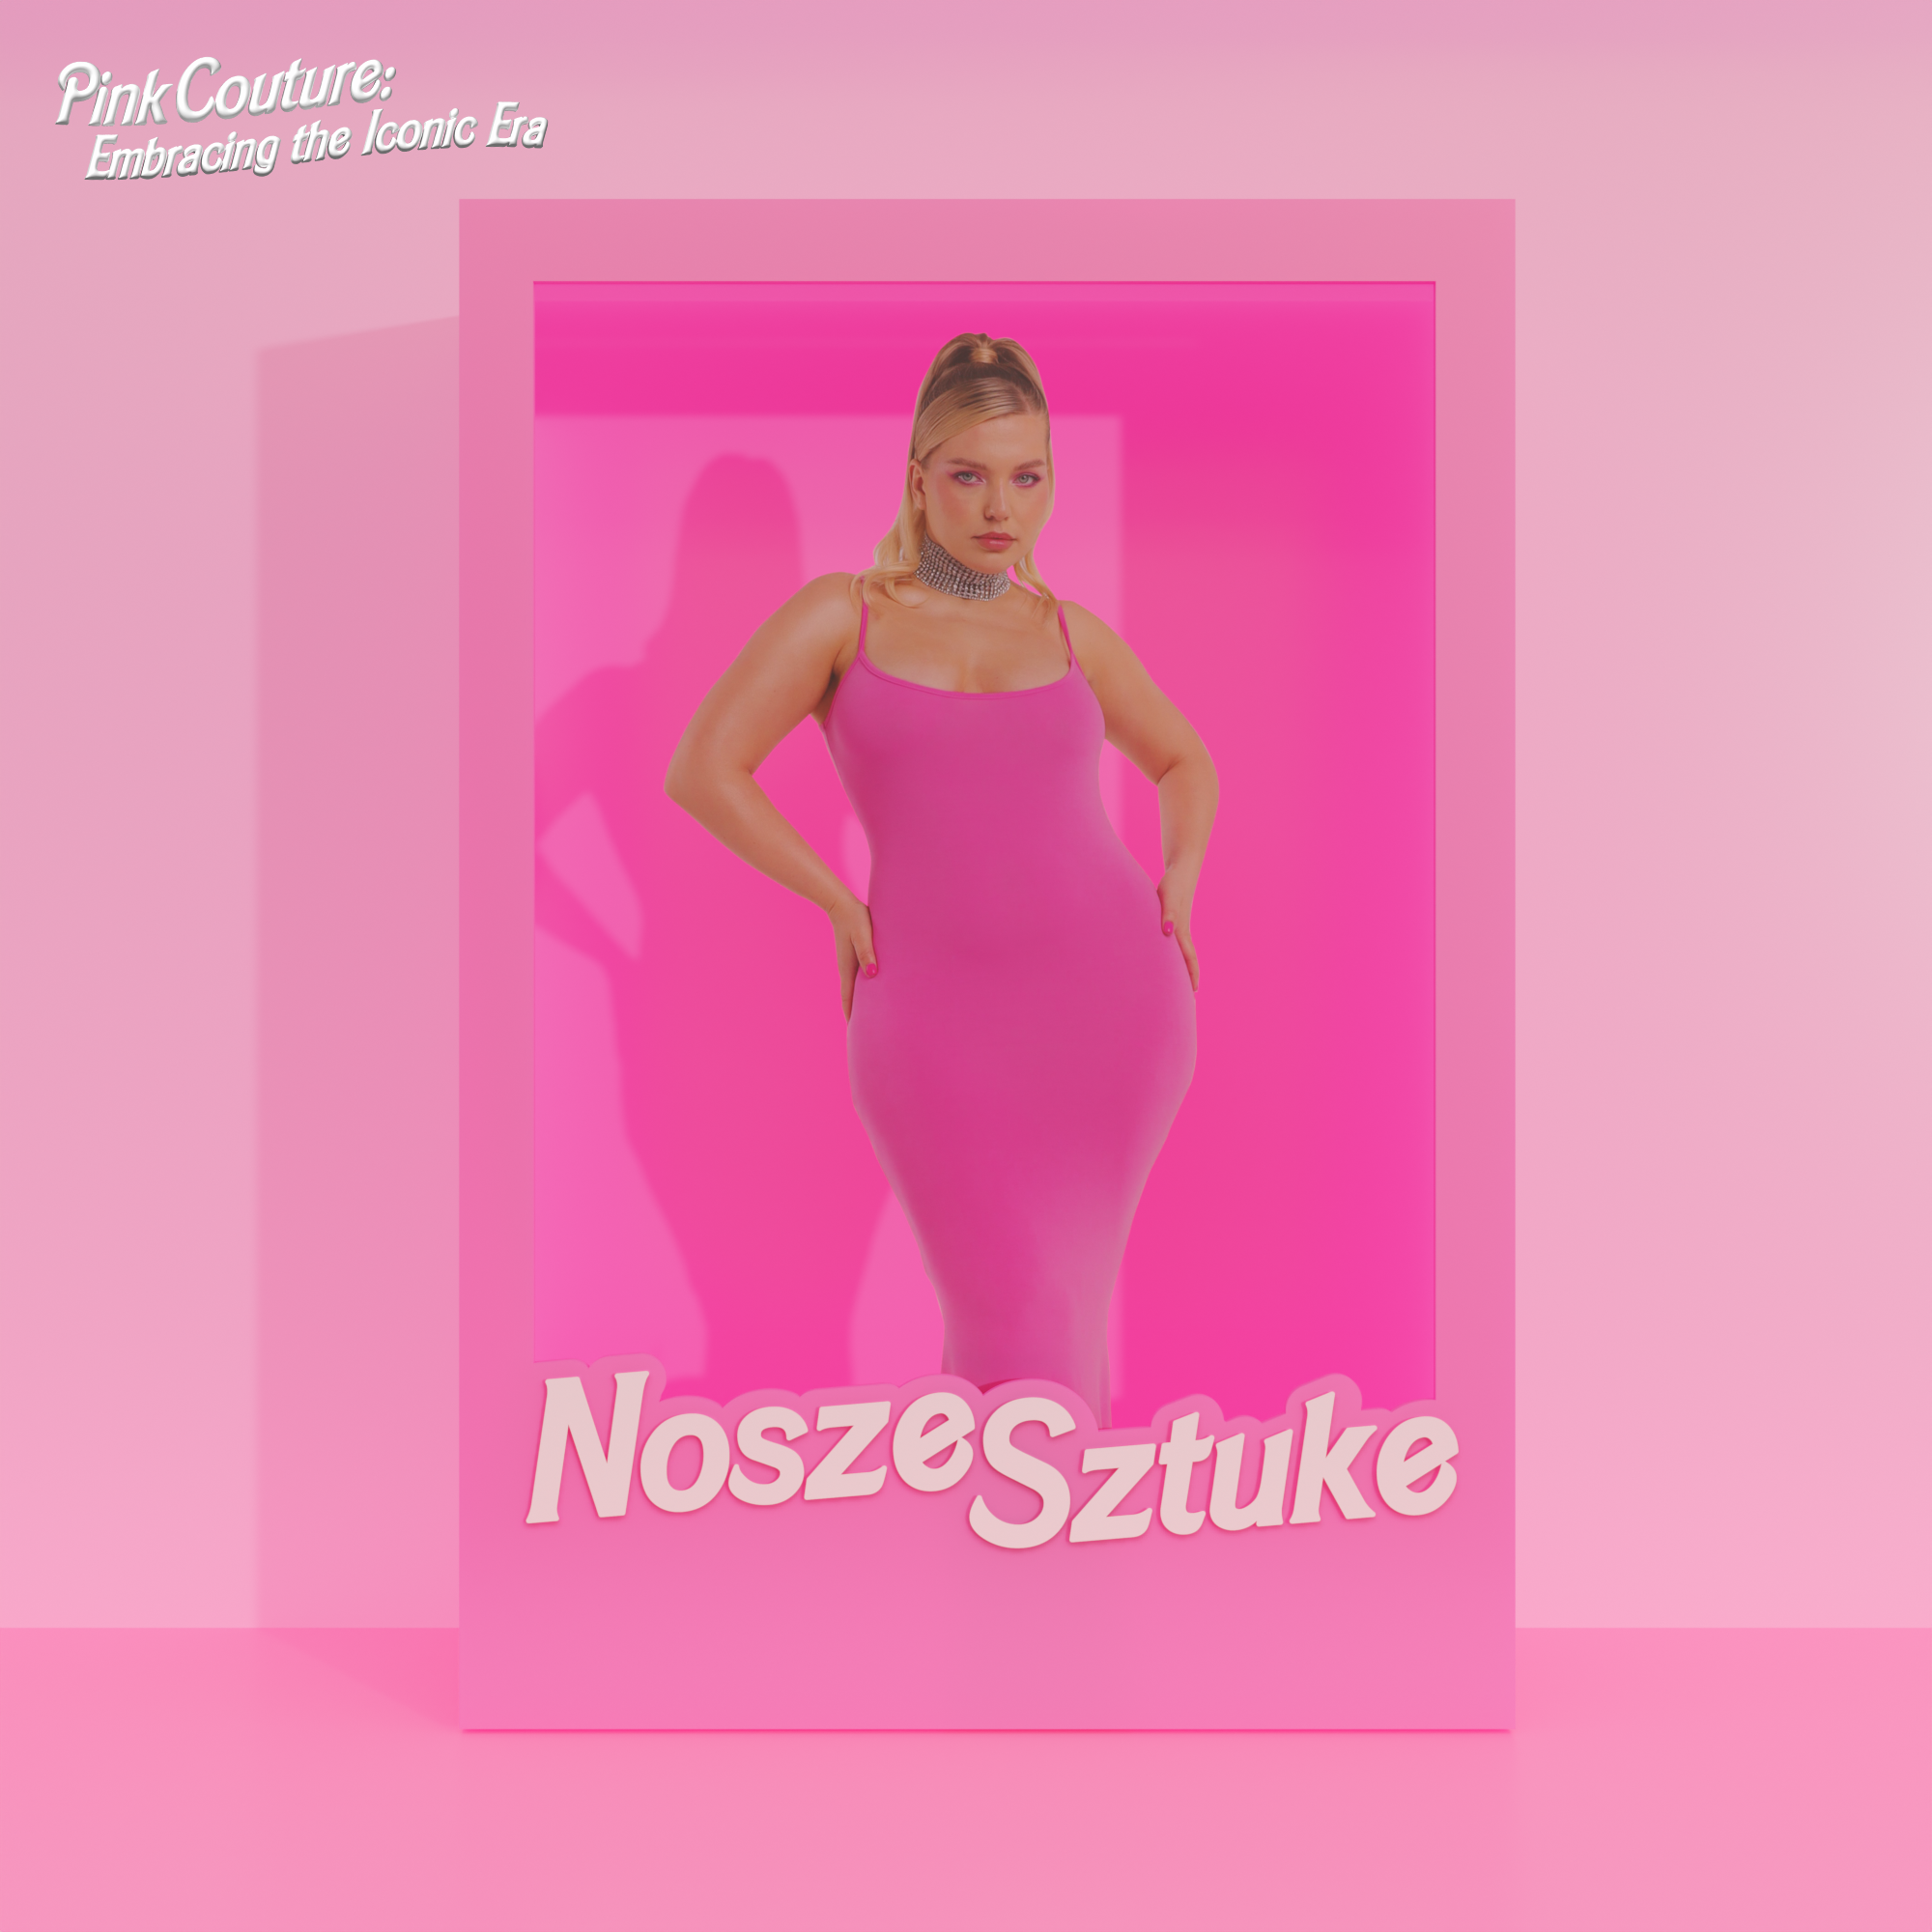 Fashion commercial for Nosze Sztuke photographed by Puulovver